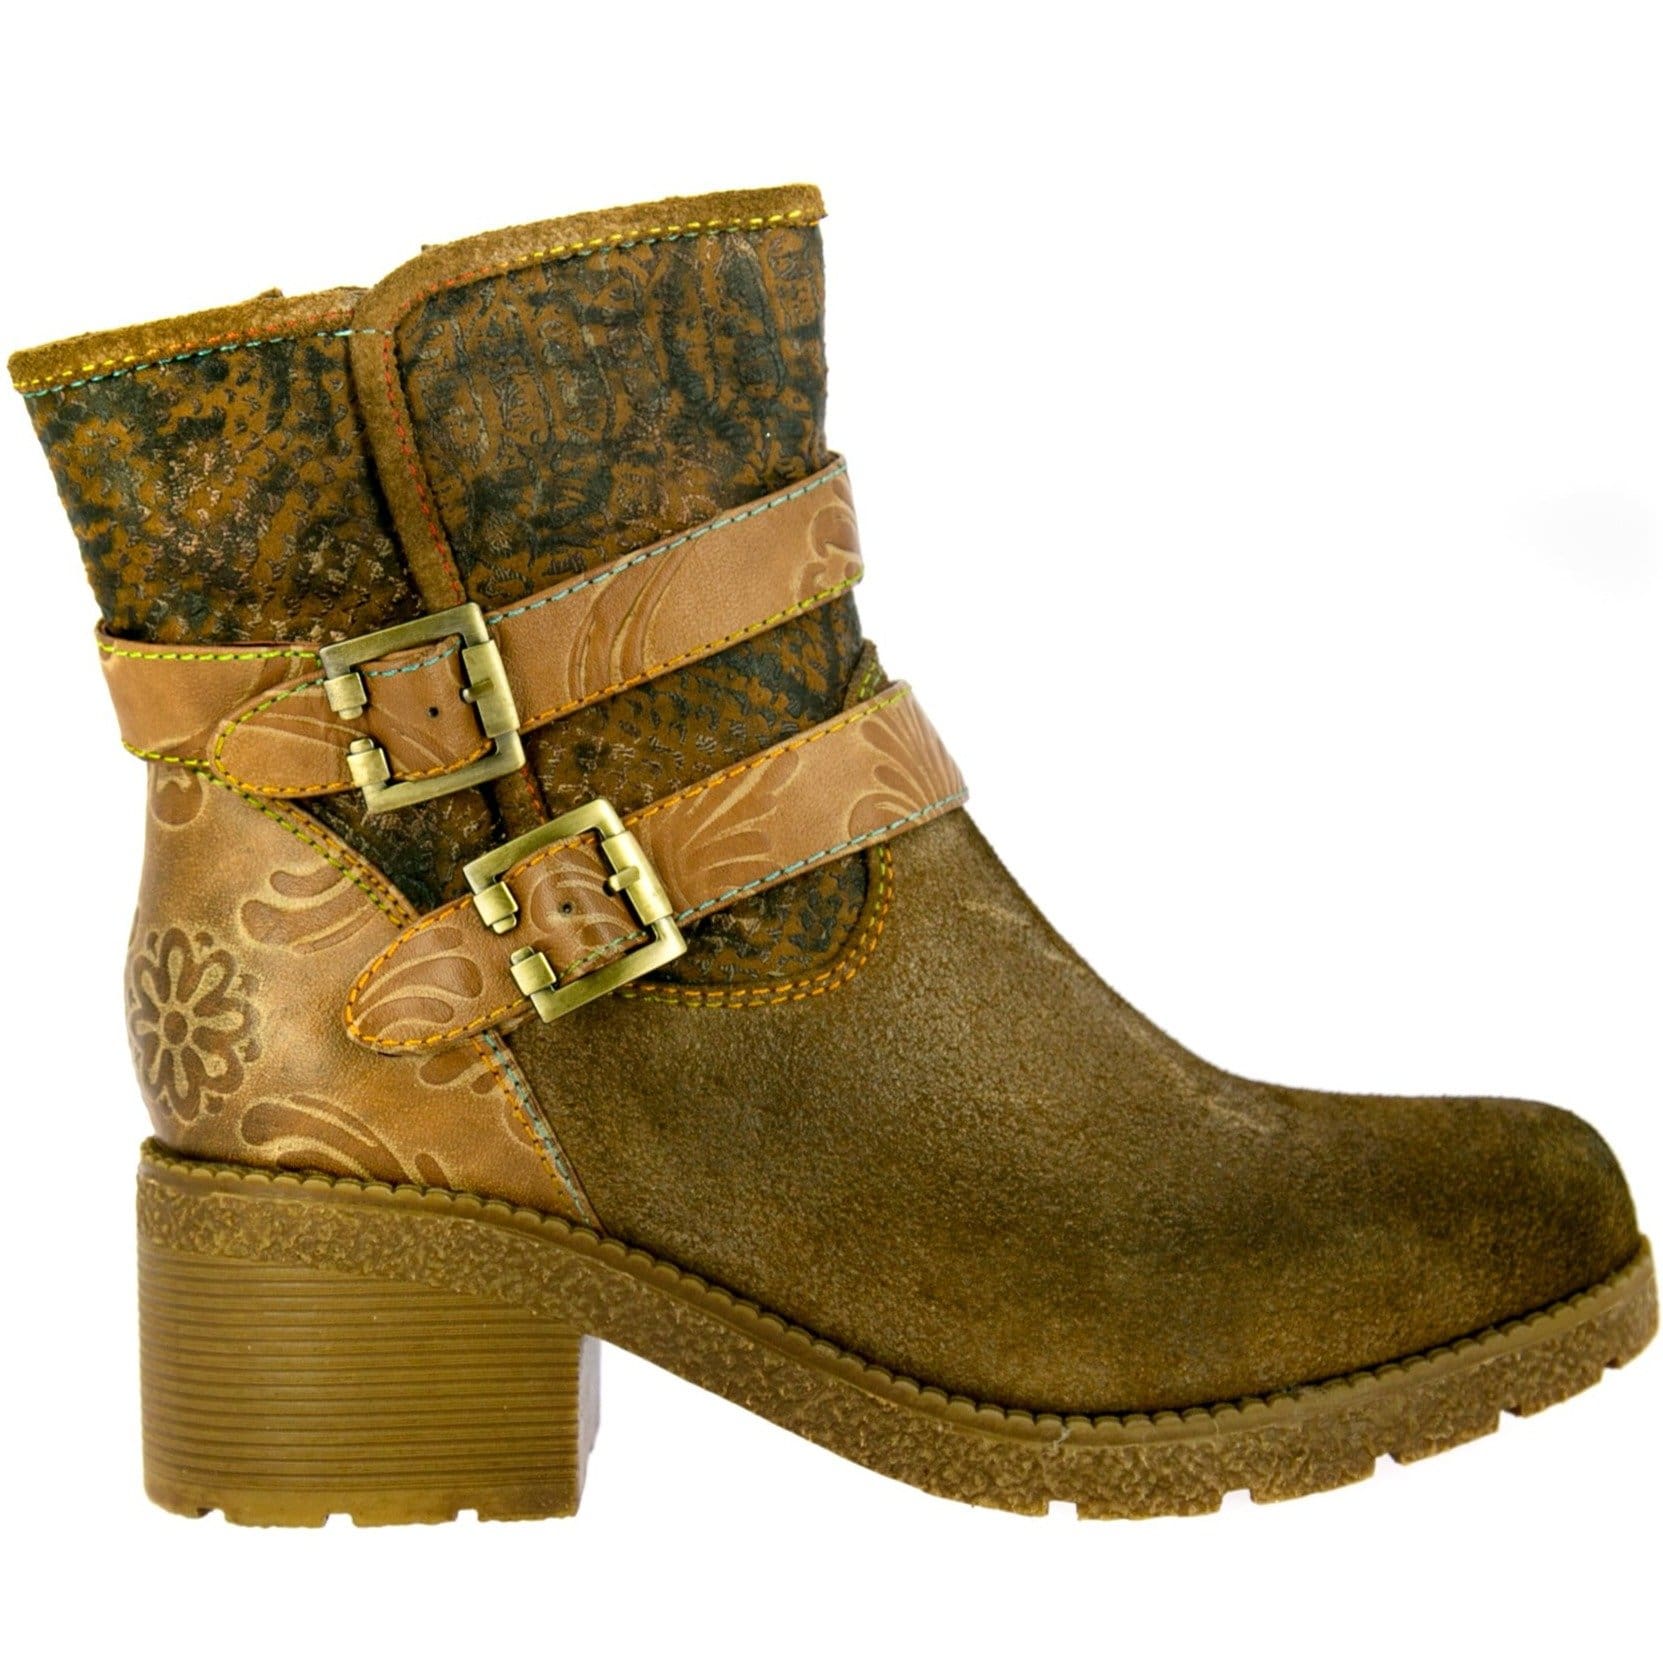 CORINE 01 shoes - 35 / Camel - Boot